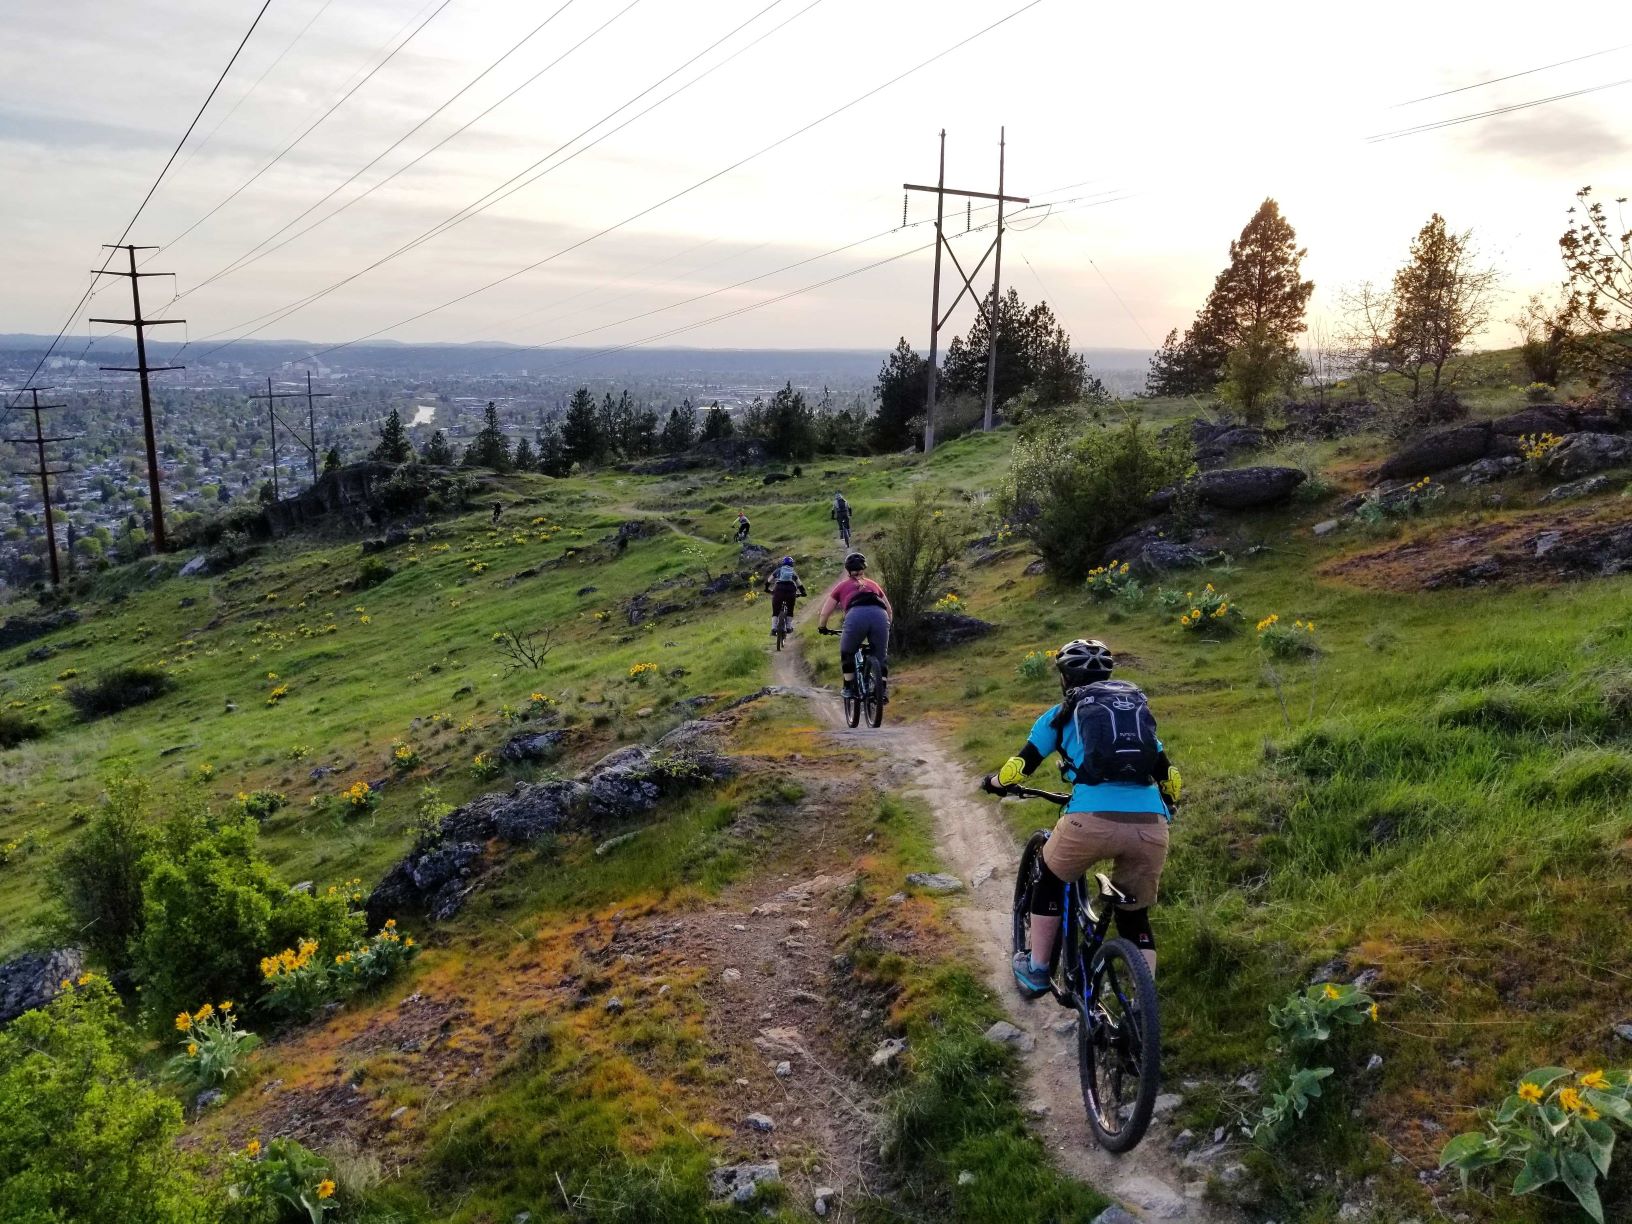 A group of people biking on a hill trail.